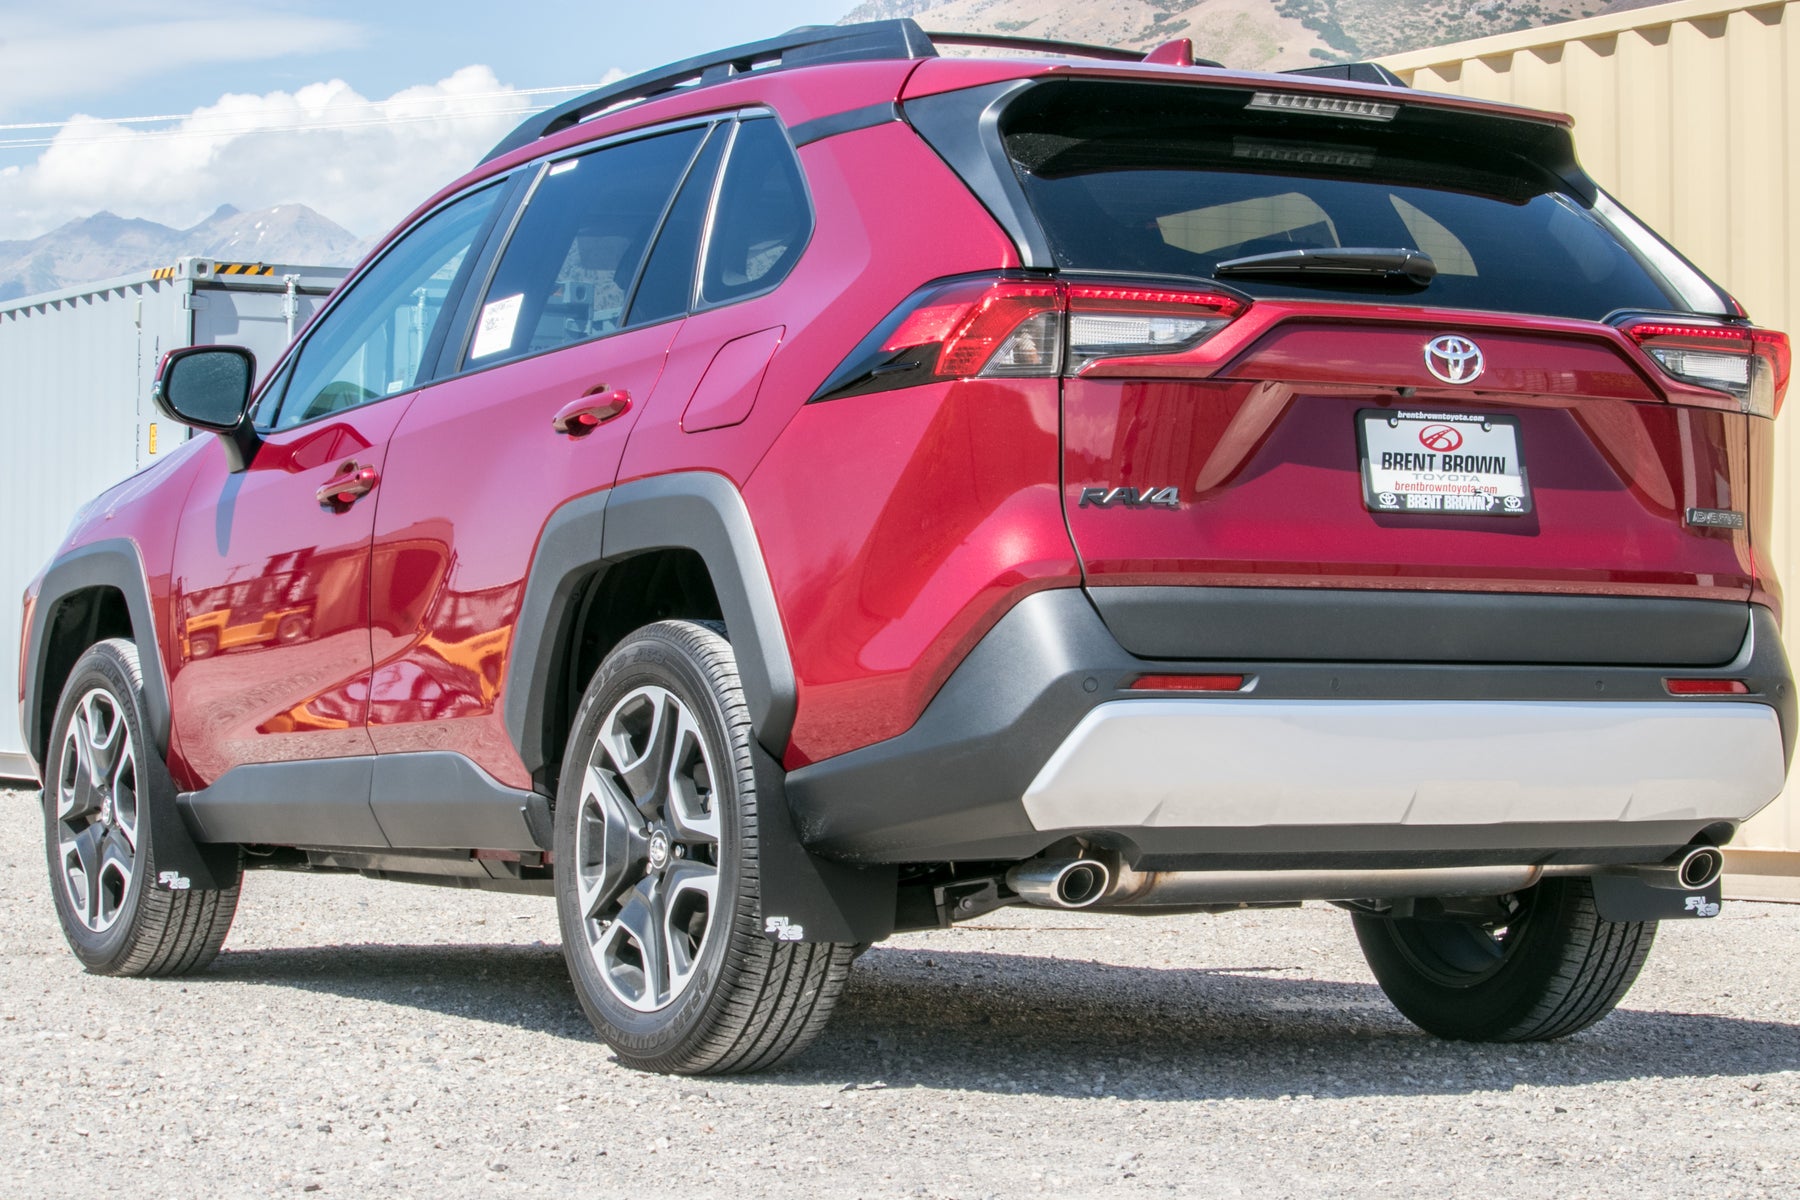 RokBlokz Mud Flaps for the 2019 and 2020 Toyota RAV4 are HERE!